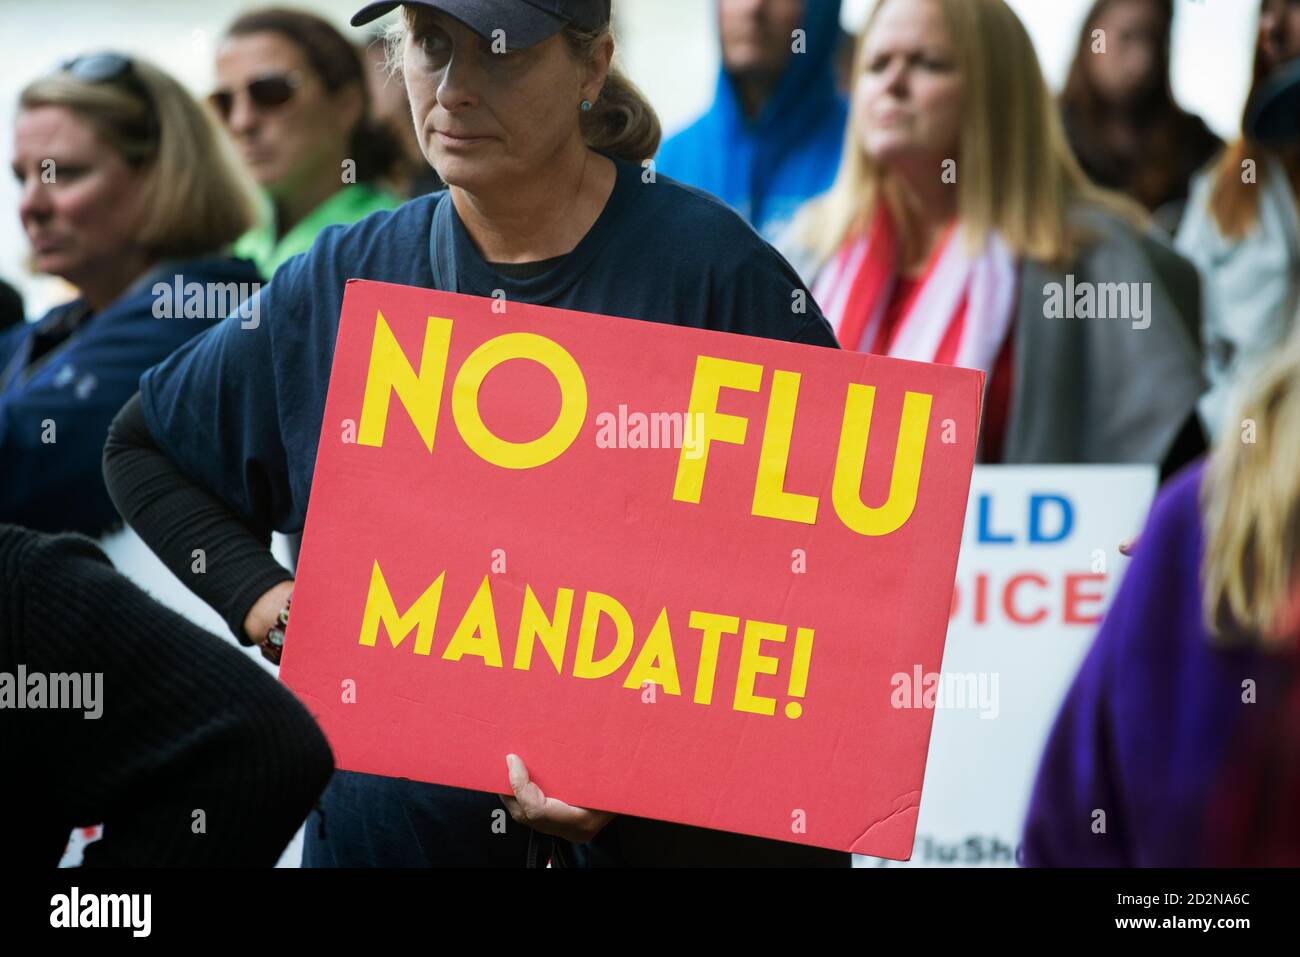 Up to 100 people gathered on October 5th 2020 outside the United States Courthouse in Boston, MA to protest a Massachusetts state law requiring all children attending public school to have been vaccinated against influenza (flu). Stock Photo